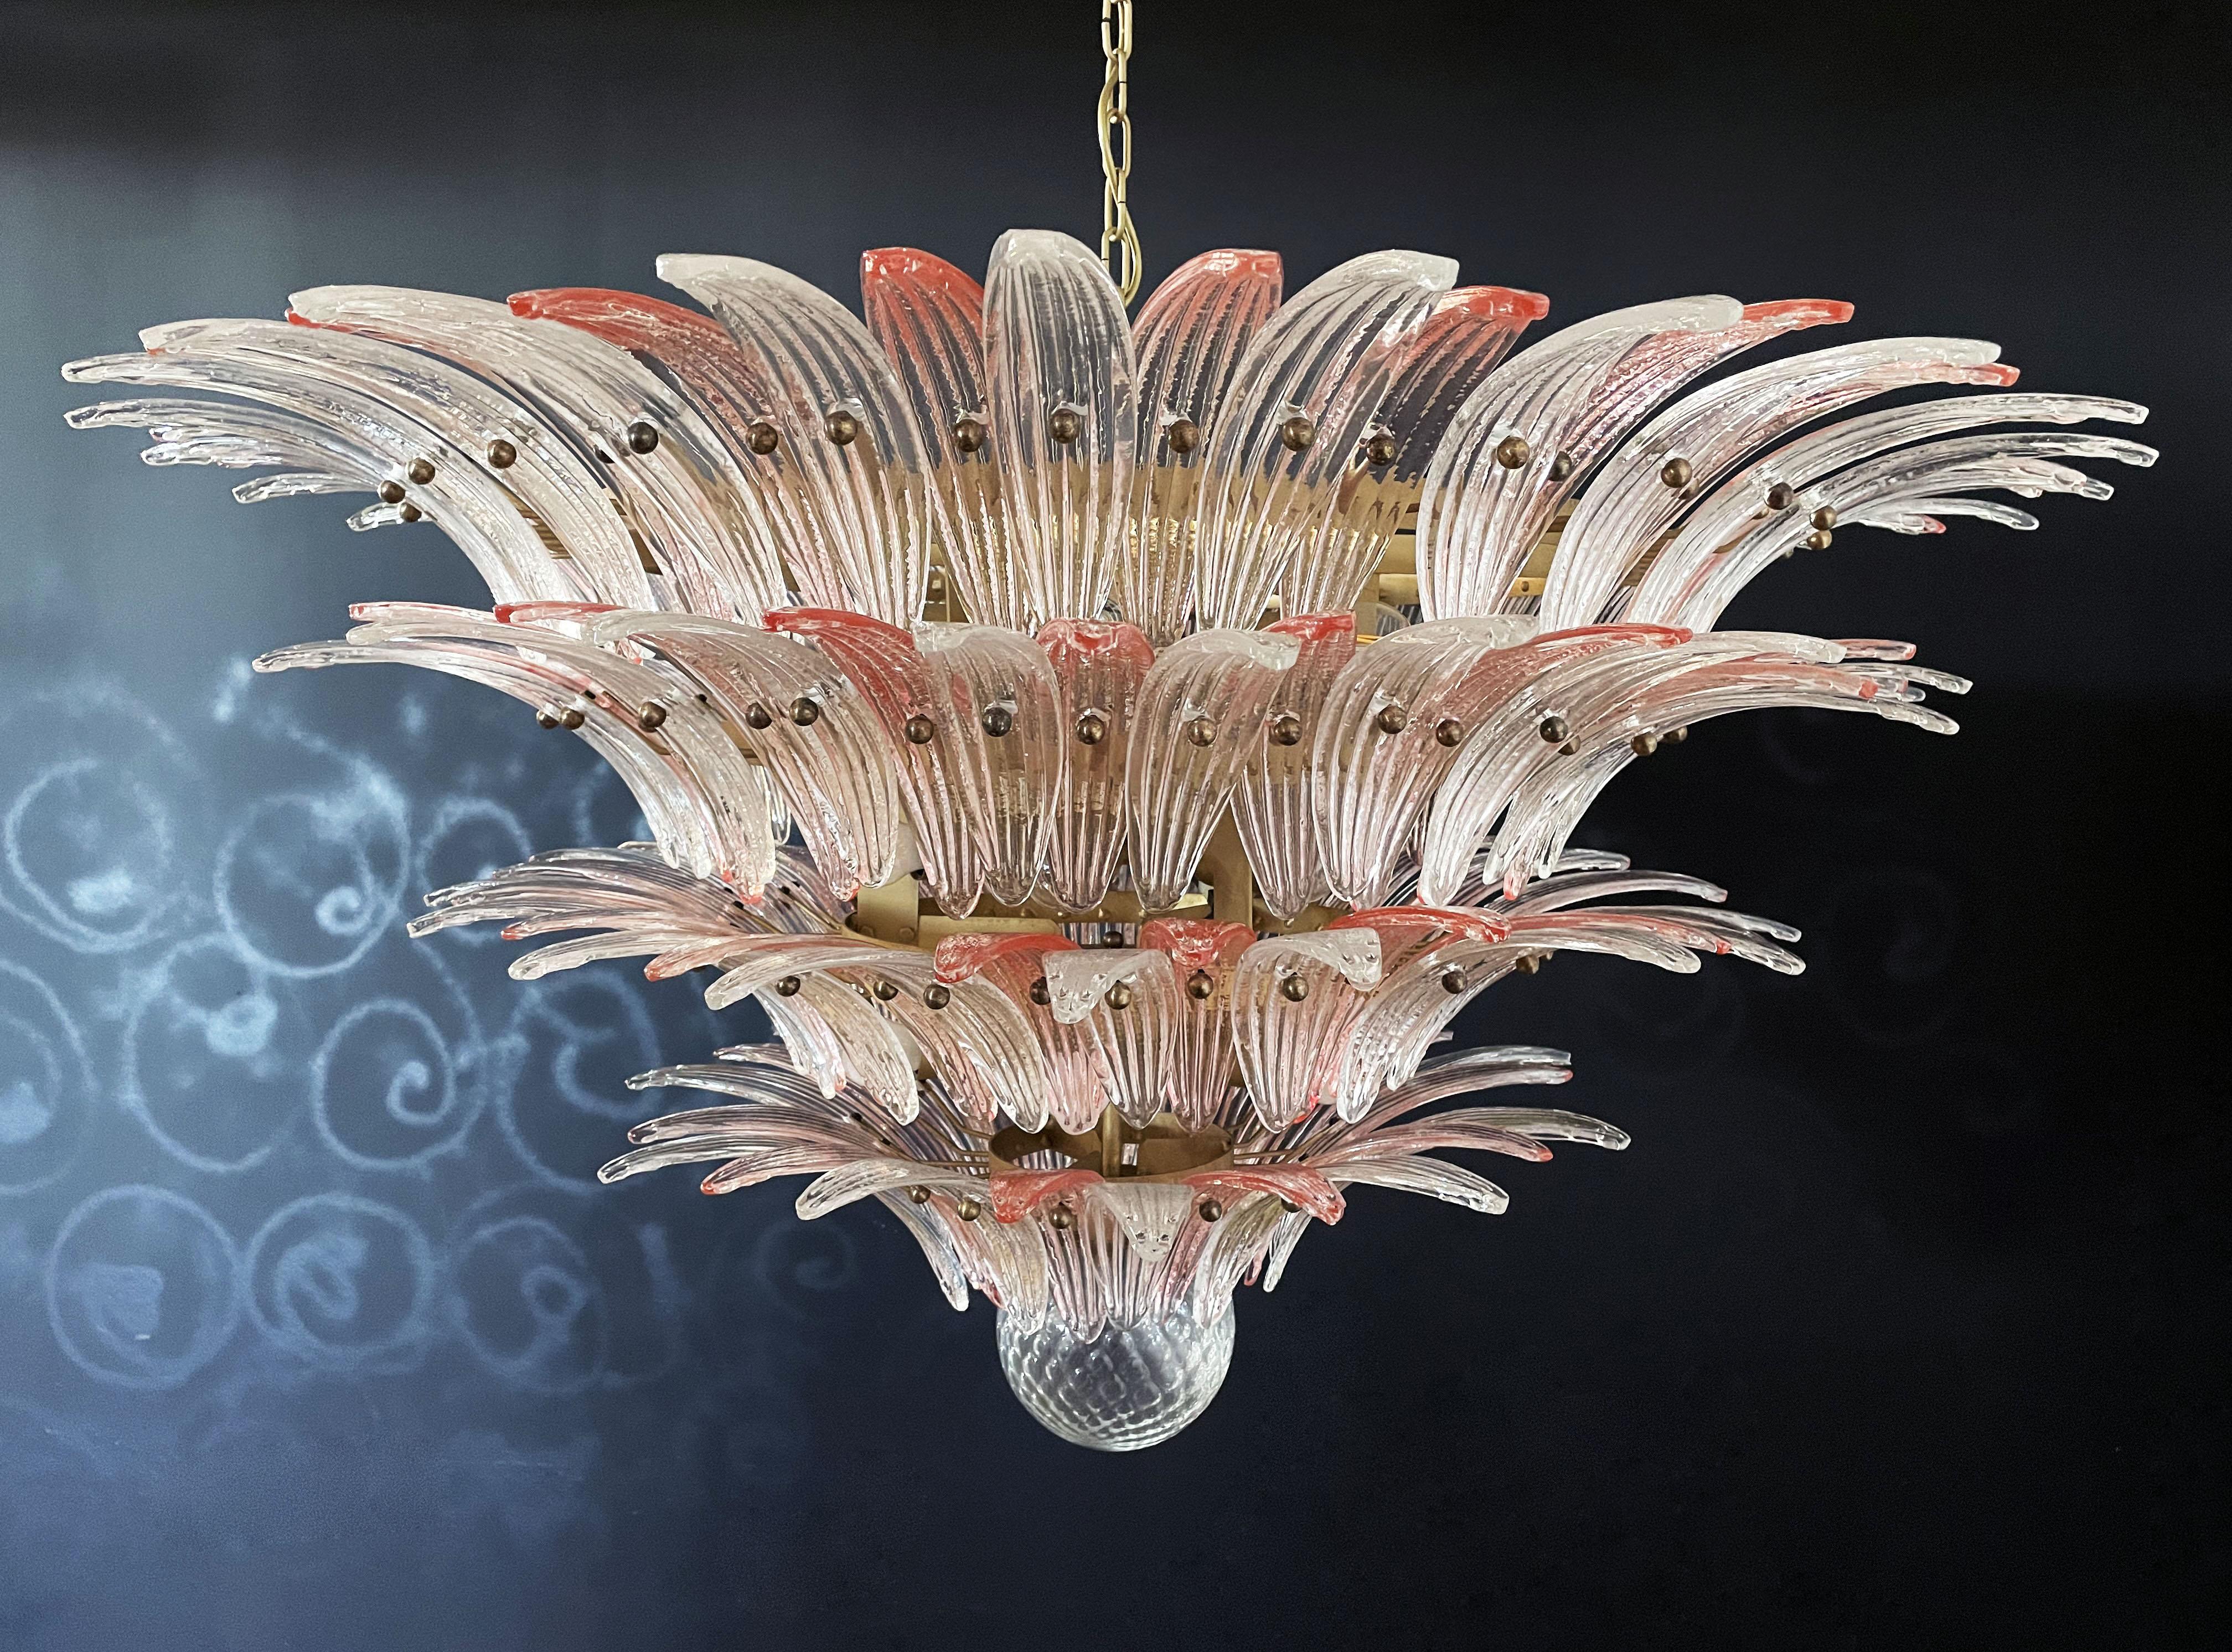 Palmette ceiling light made by 163 Murano pink and trasparent glasses in a gold metal frame. Murano blown glass in a traditional way. Structure in gold colored metal.
Period: late XX century 
Dimensions: 55,10 inches (140cm) height with chain; 31,50